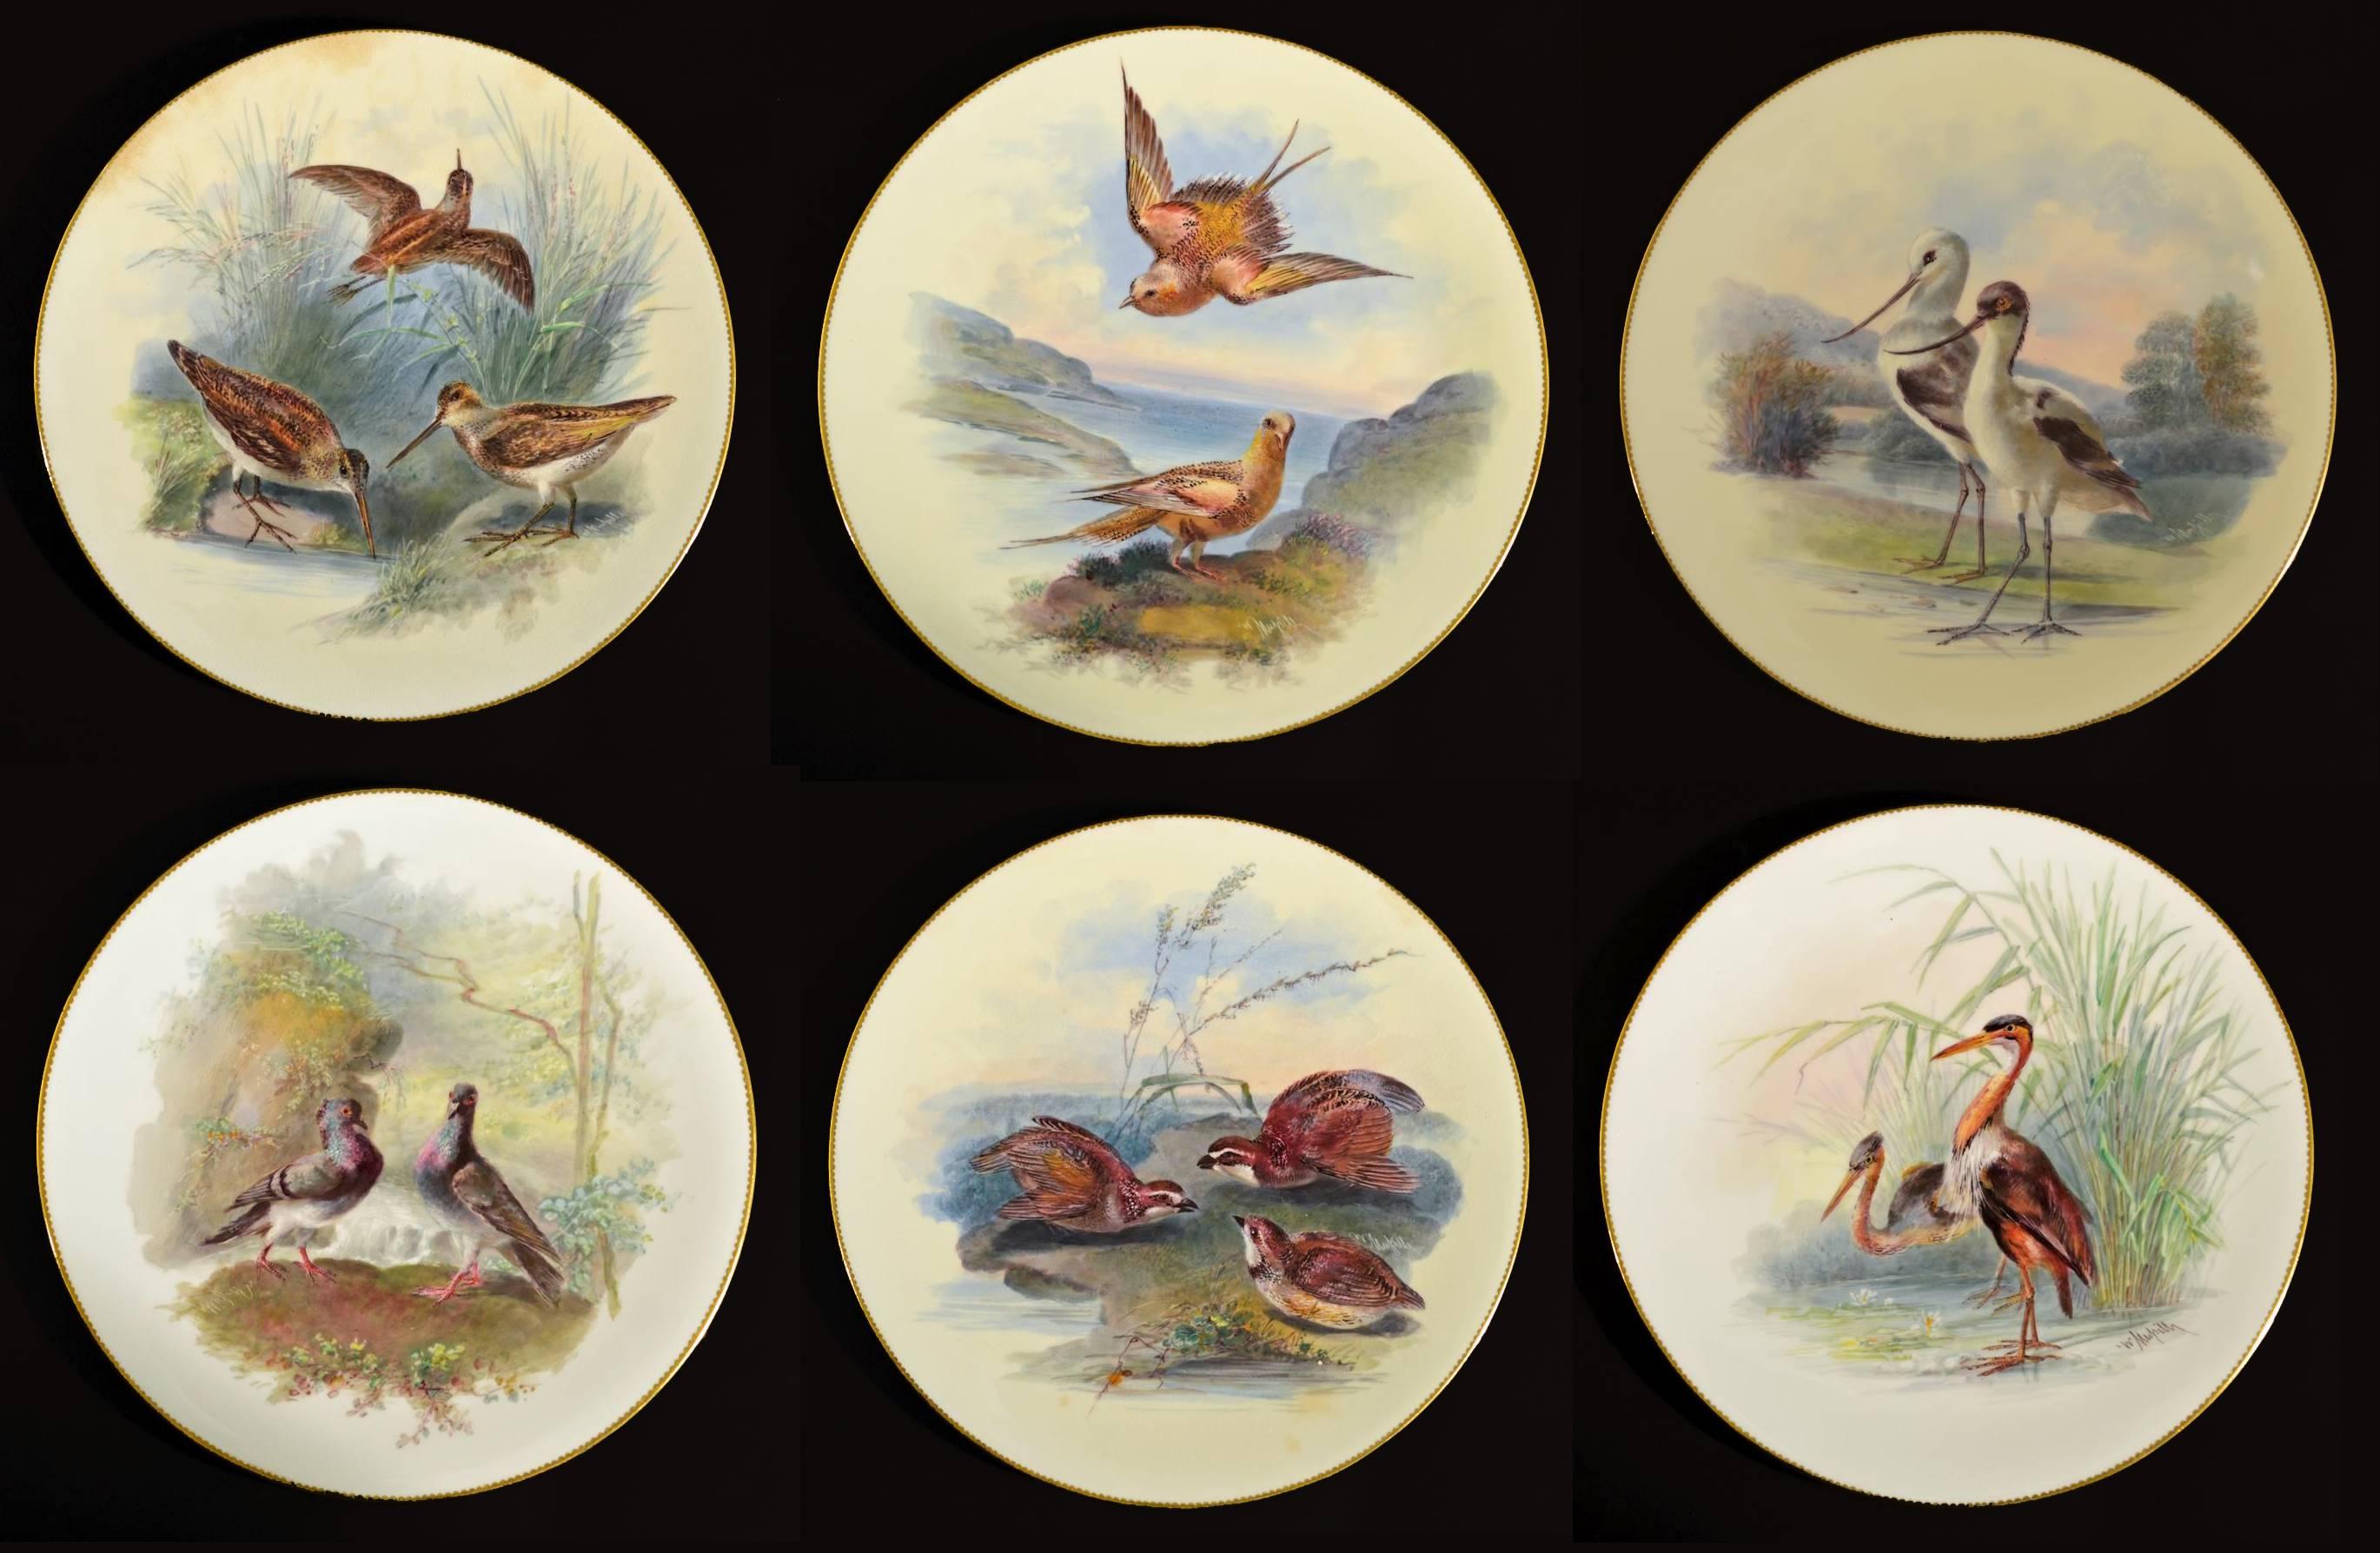 Minton porcelain bird plates are signed by William Mussil who was considered by some to be the finest Bird Painter in the ceramics world had seen at the time he painted these lovely plates of birds in landscape setting along with rich gold gilt